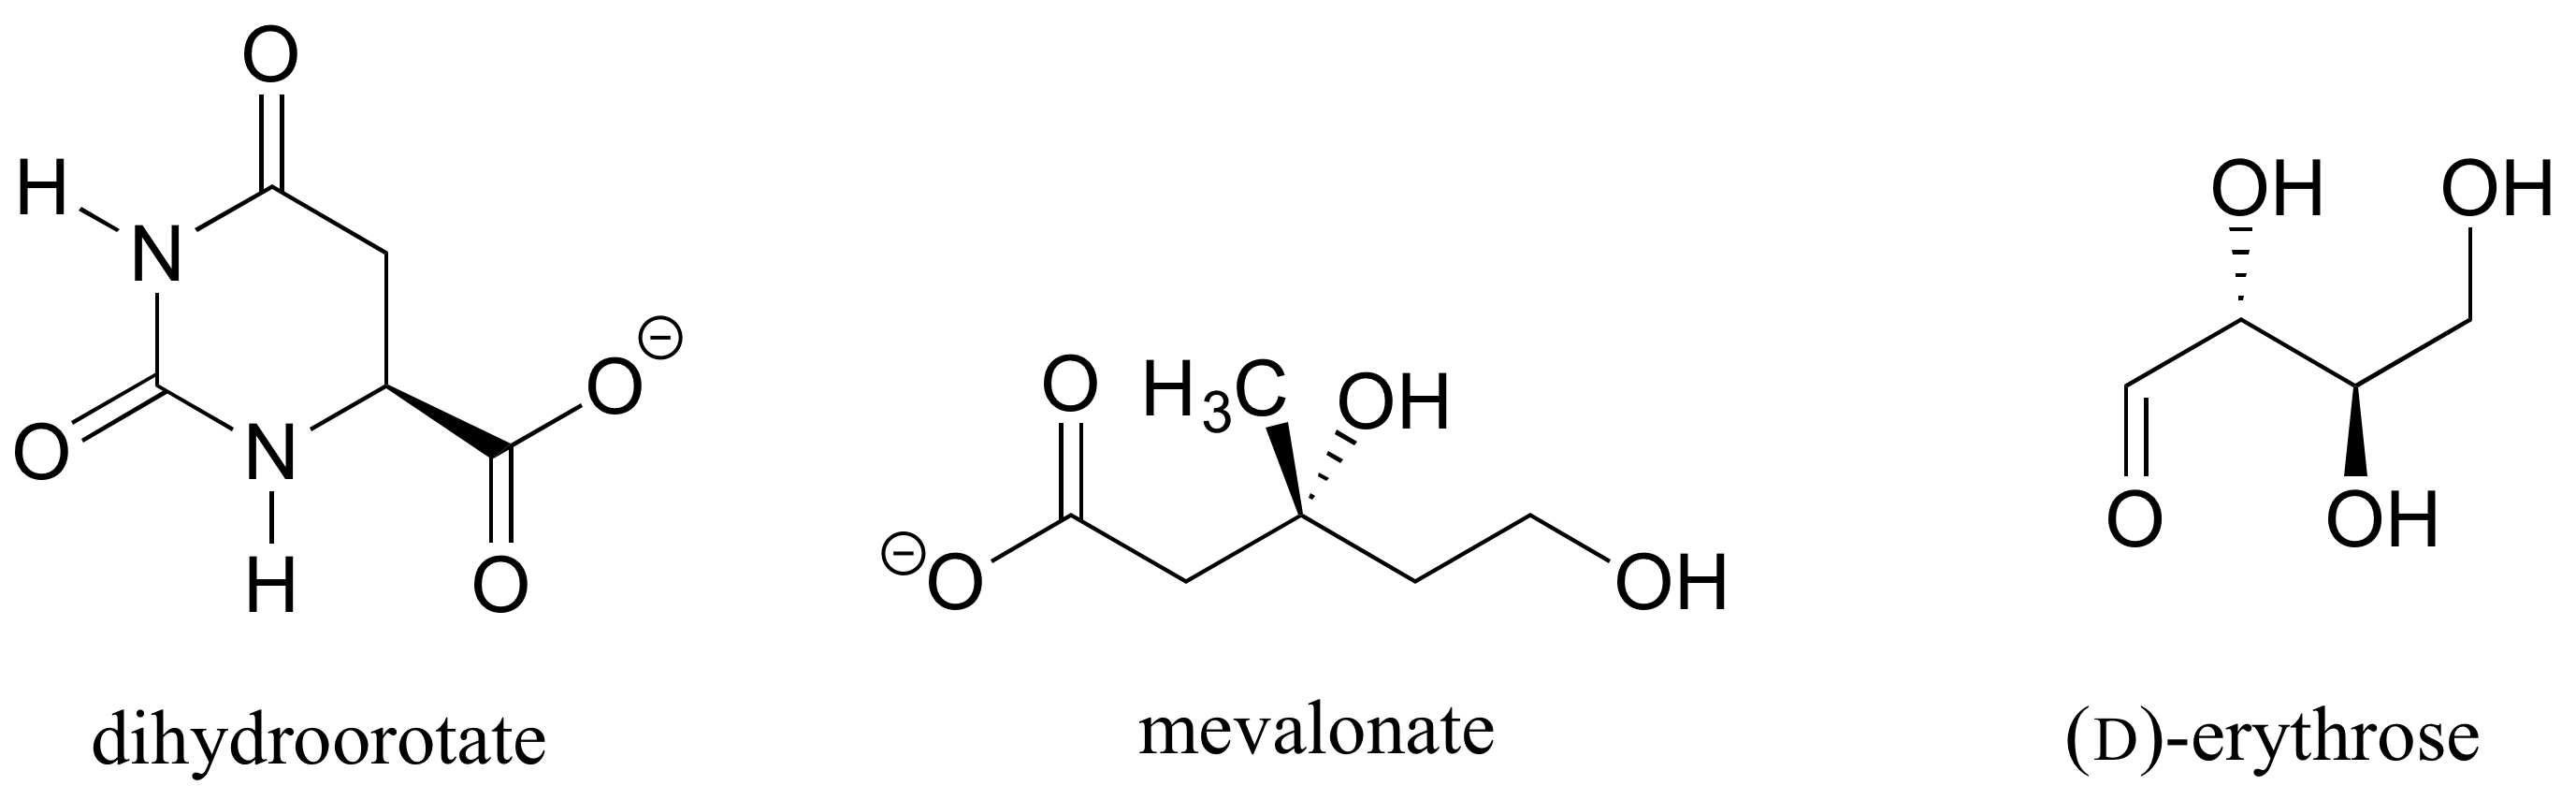 From left to right: dihydroorotate molecule, mevalonate molecule, (D)-erythrose molecule.